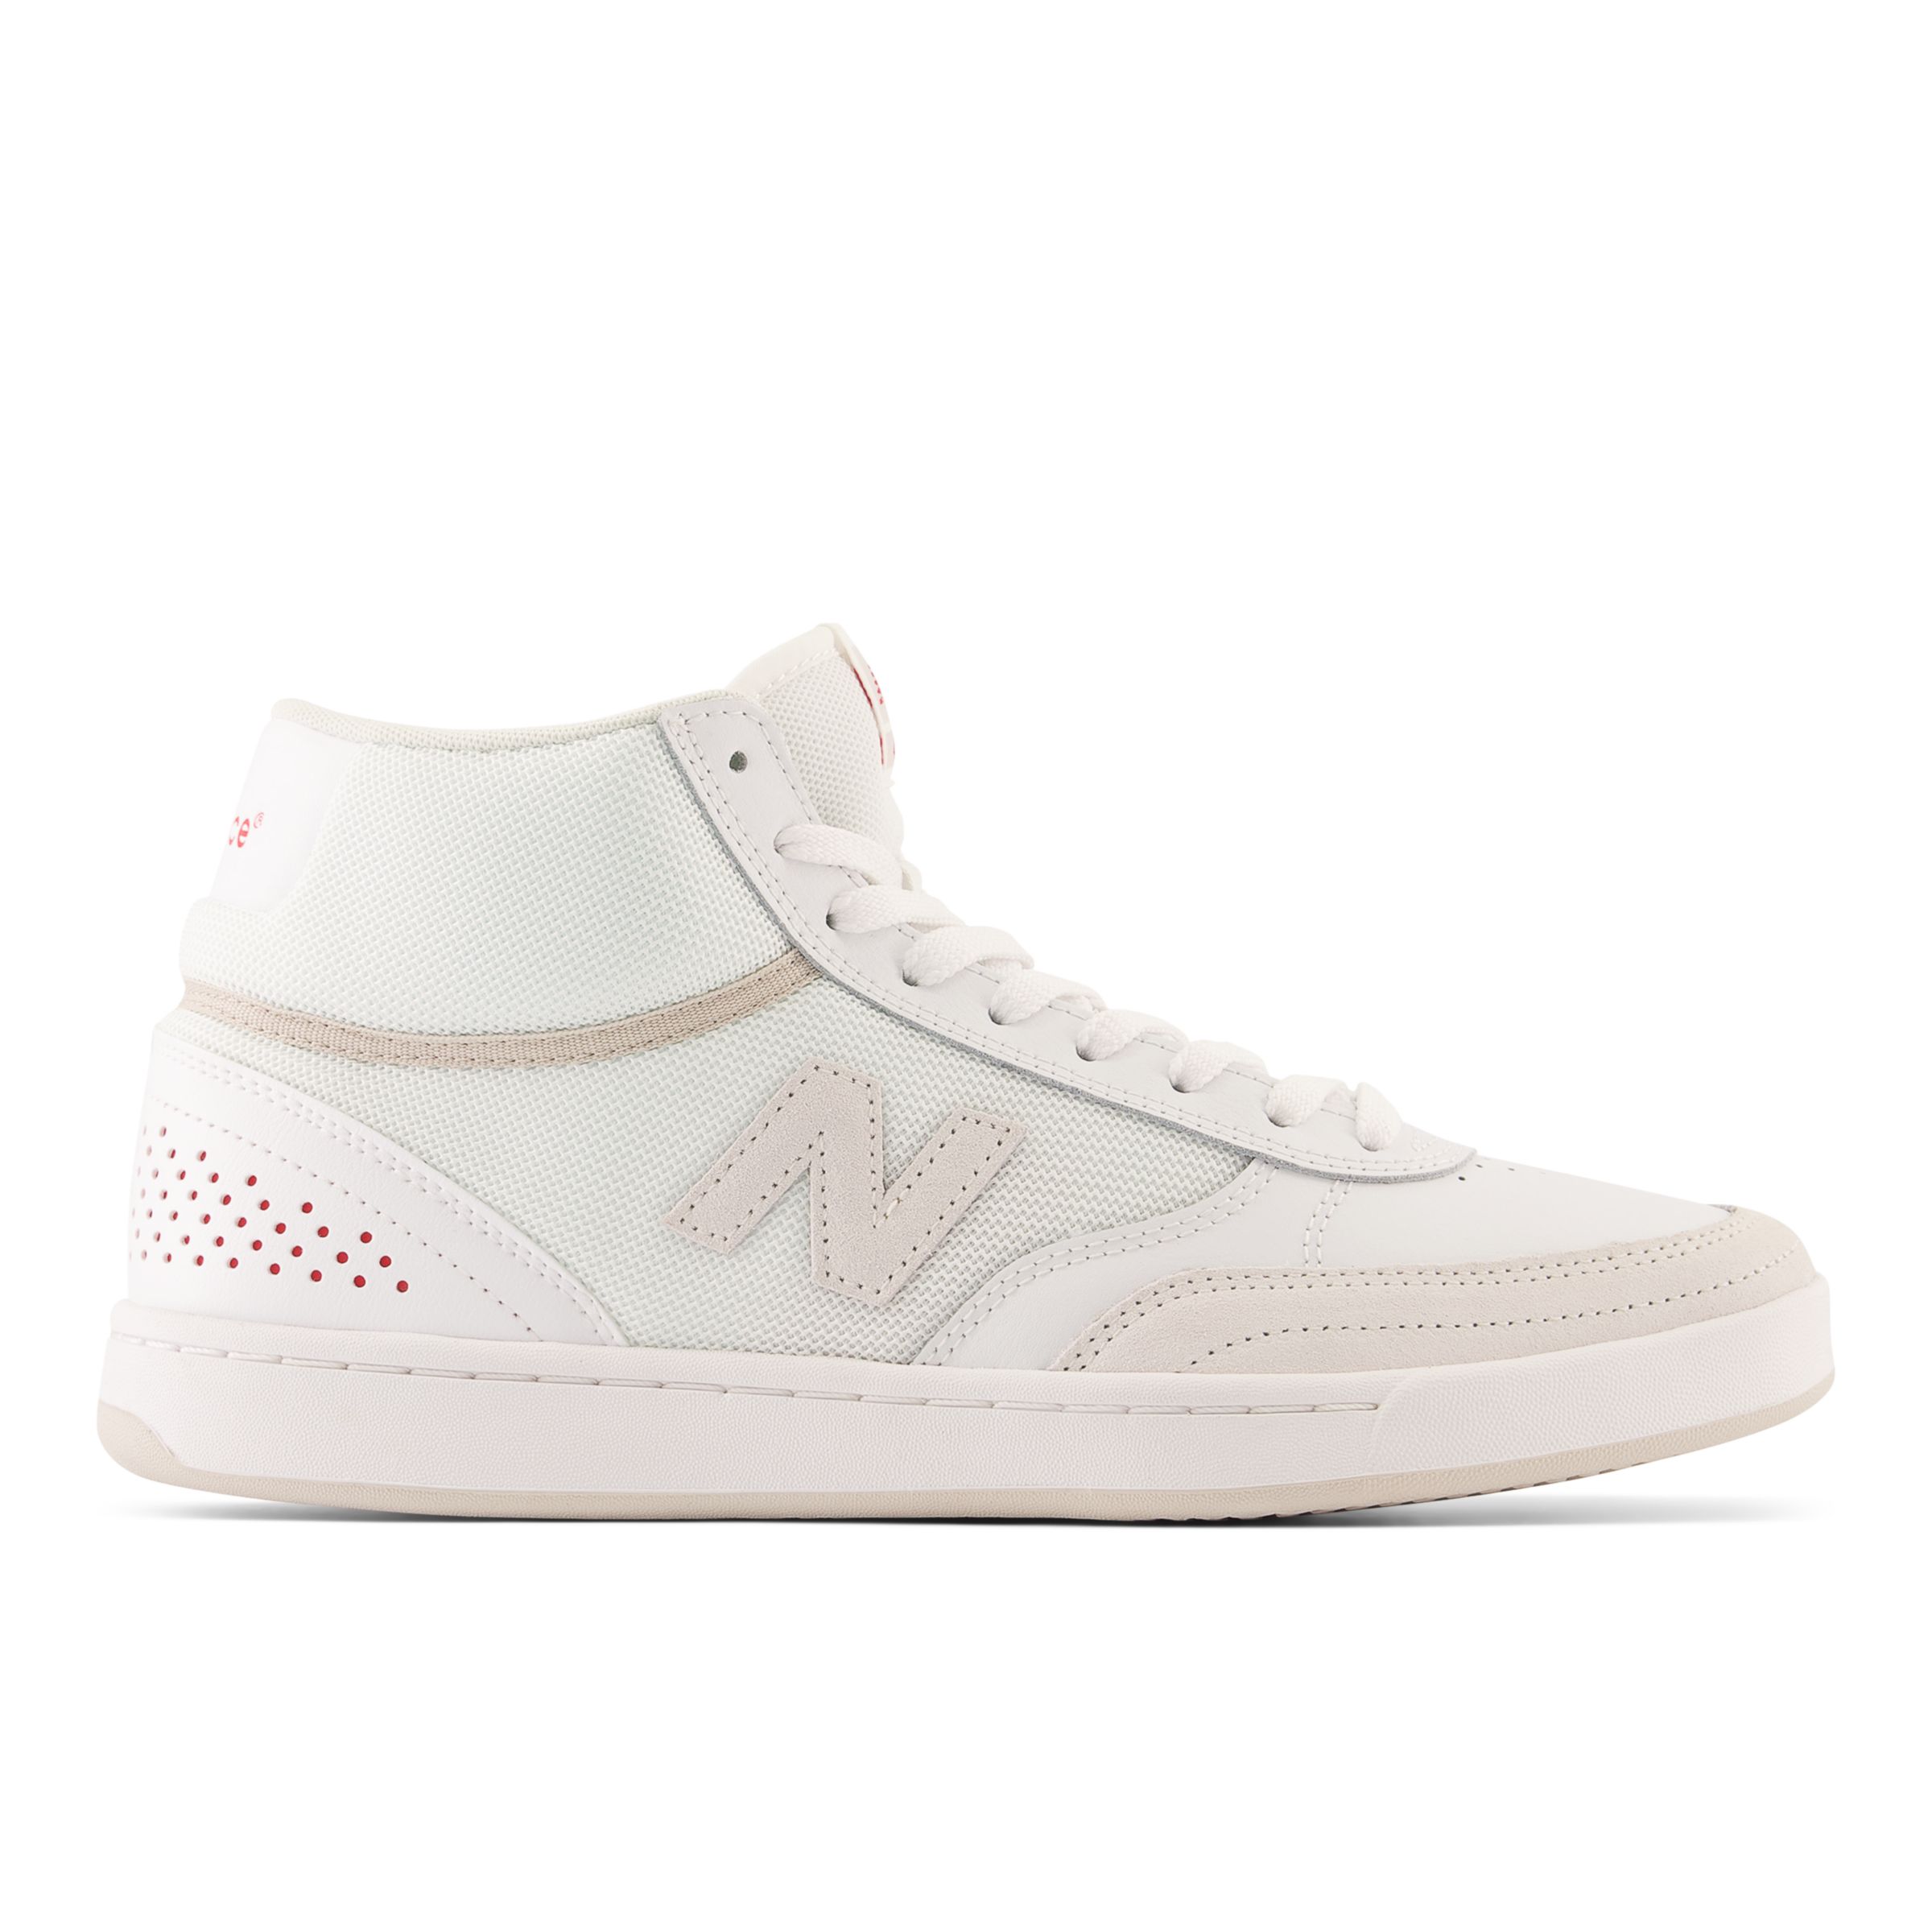 New Balance Unisex Nb Numeric 440 High In White/red